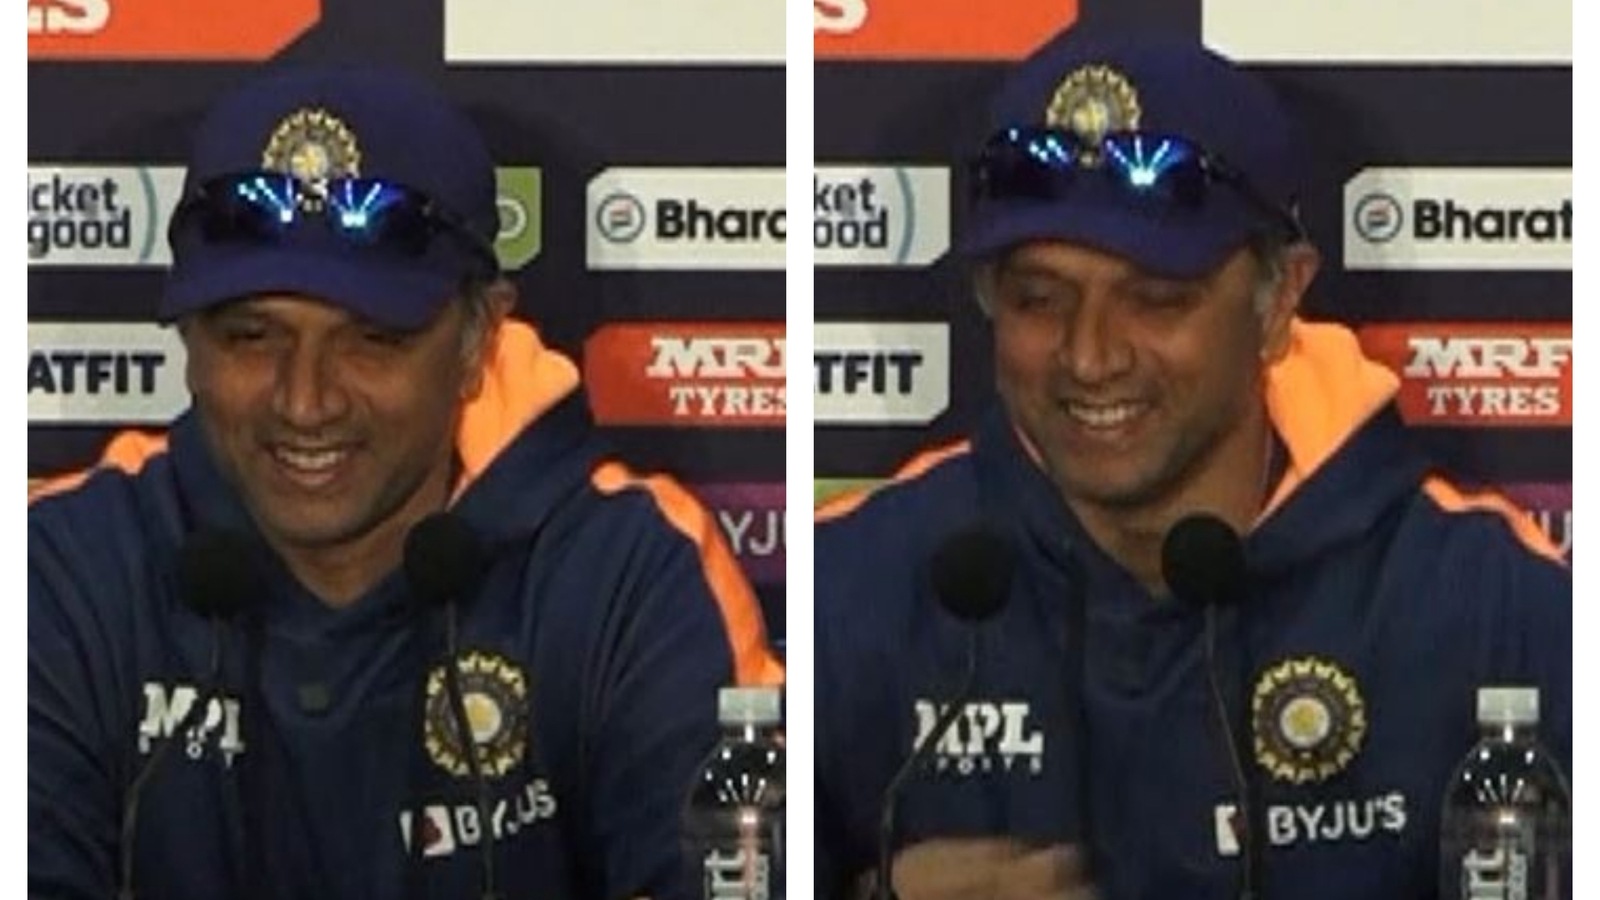 watch-rahul-dravid-can-t-stop-laughing-at-chief-selector-s-comment-on-t20-world-cup-dinesh-karthik-rishabh-pant